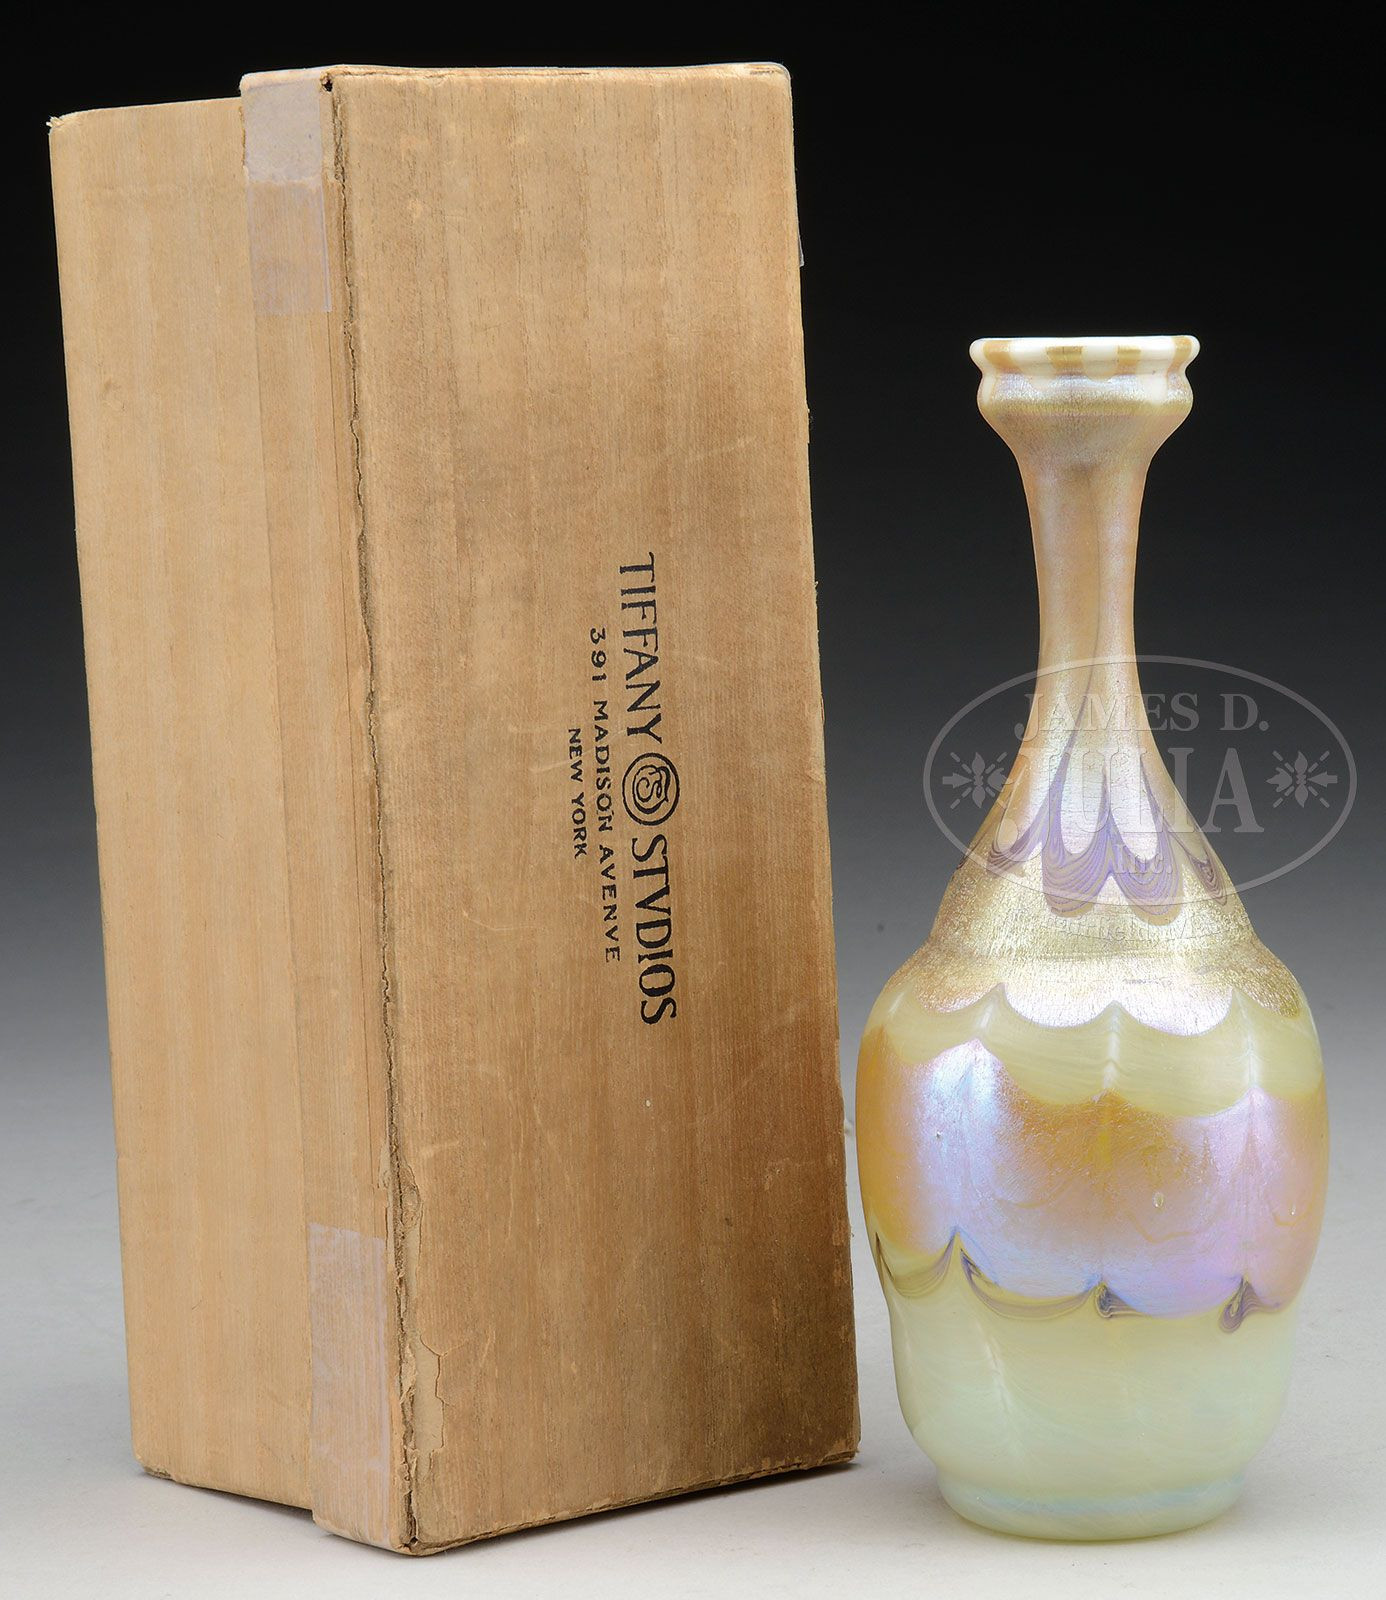 stained glass vase of tiffany favrile glass decorated vase tiffany favrile vase has intended for tiffany favrile glass decorated vase tiffany favrile vase has opaque cream colored glass body shading